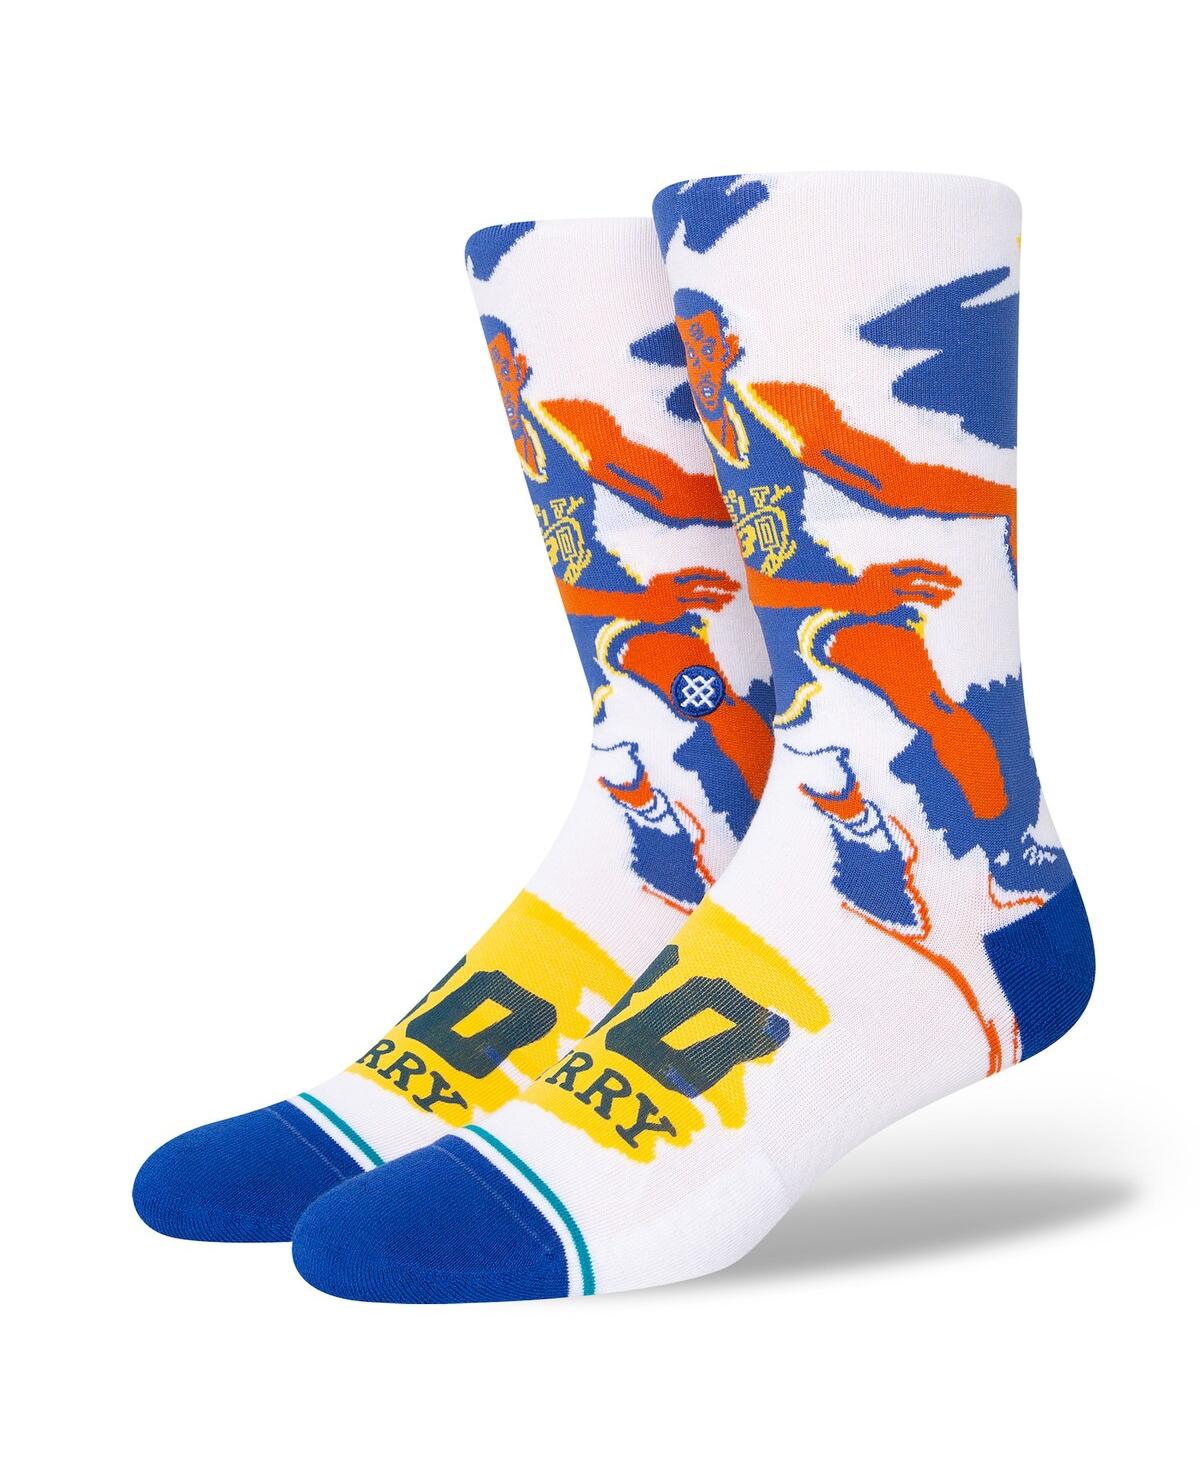 Men's Stance Stephen Curry Golden State Warriors Player Paint Crew Socks - White